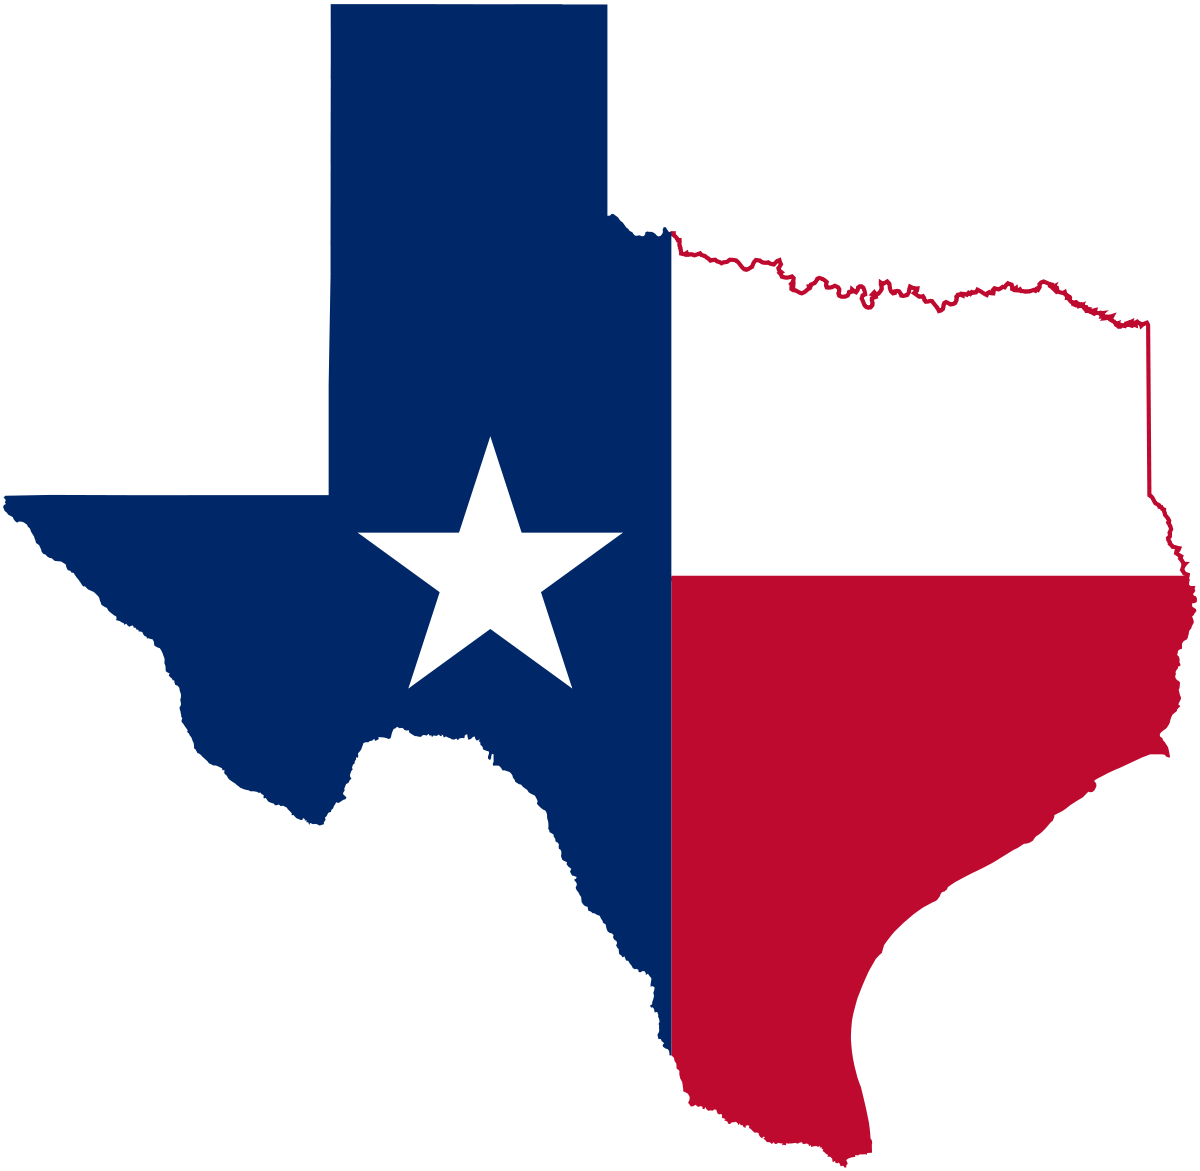 Lone Star Cannabis: What’s Holding Texas Back?